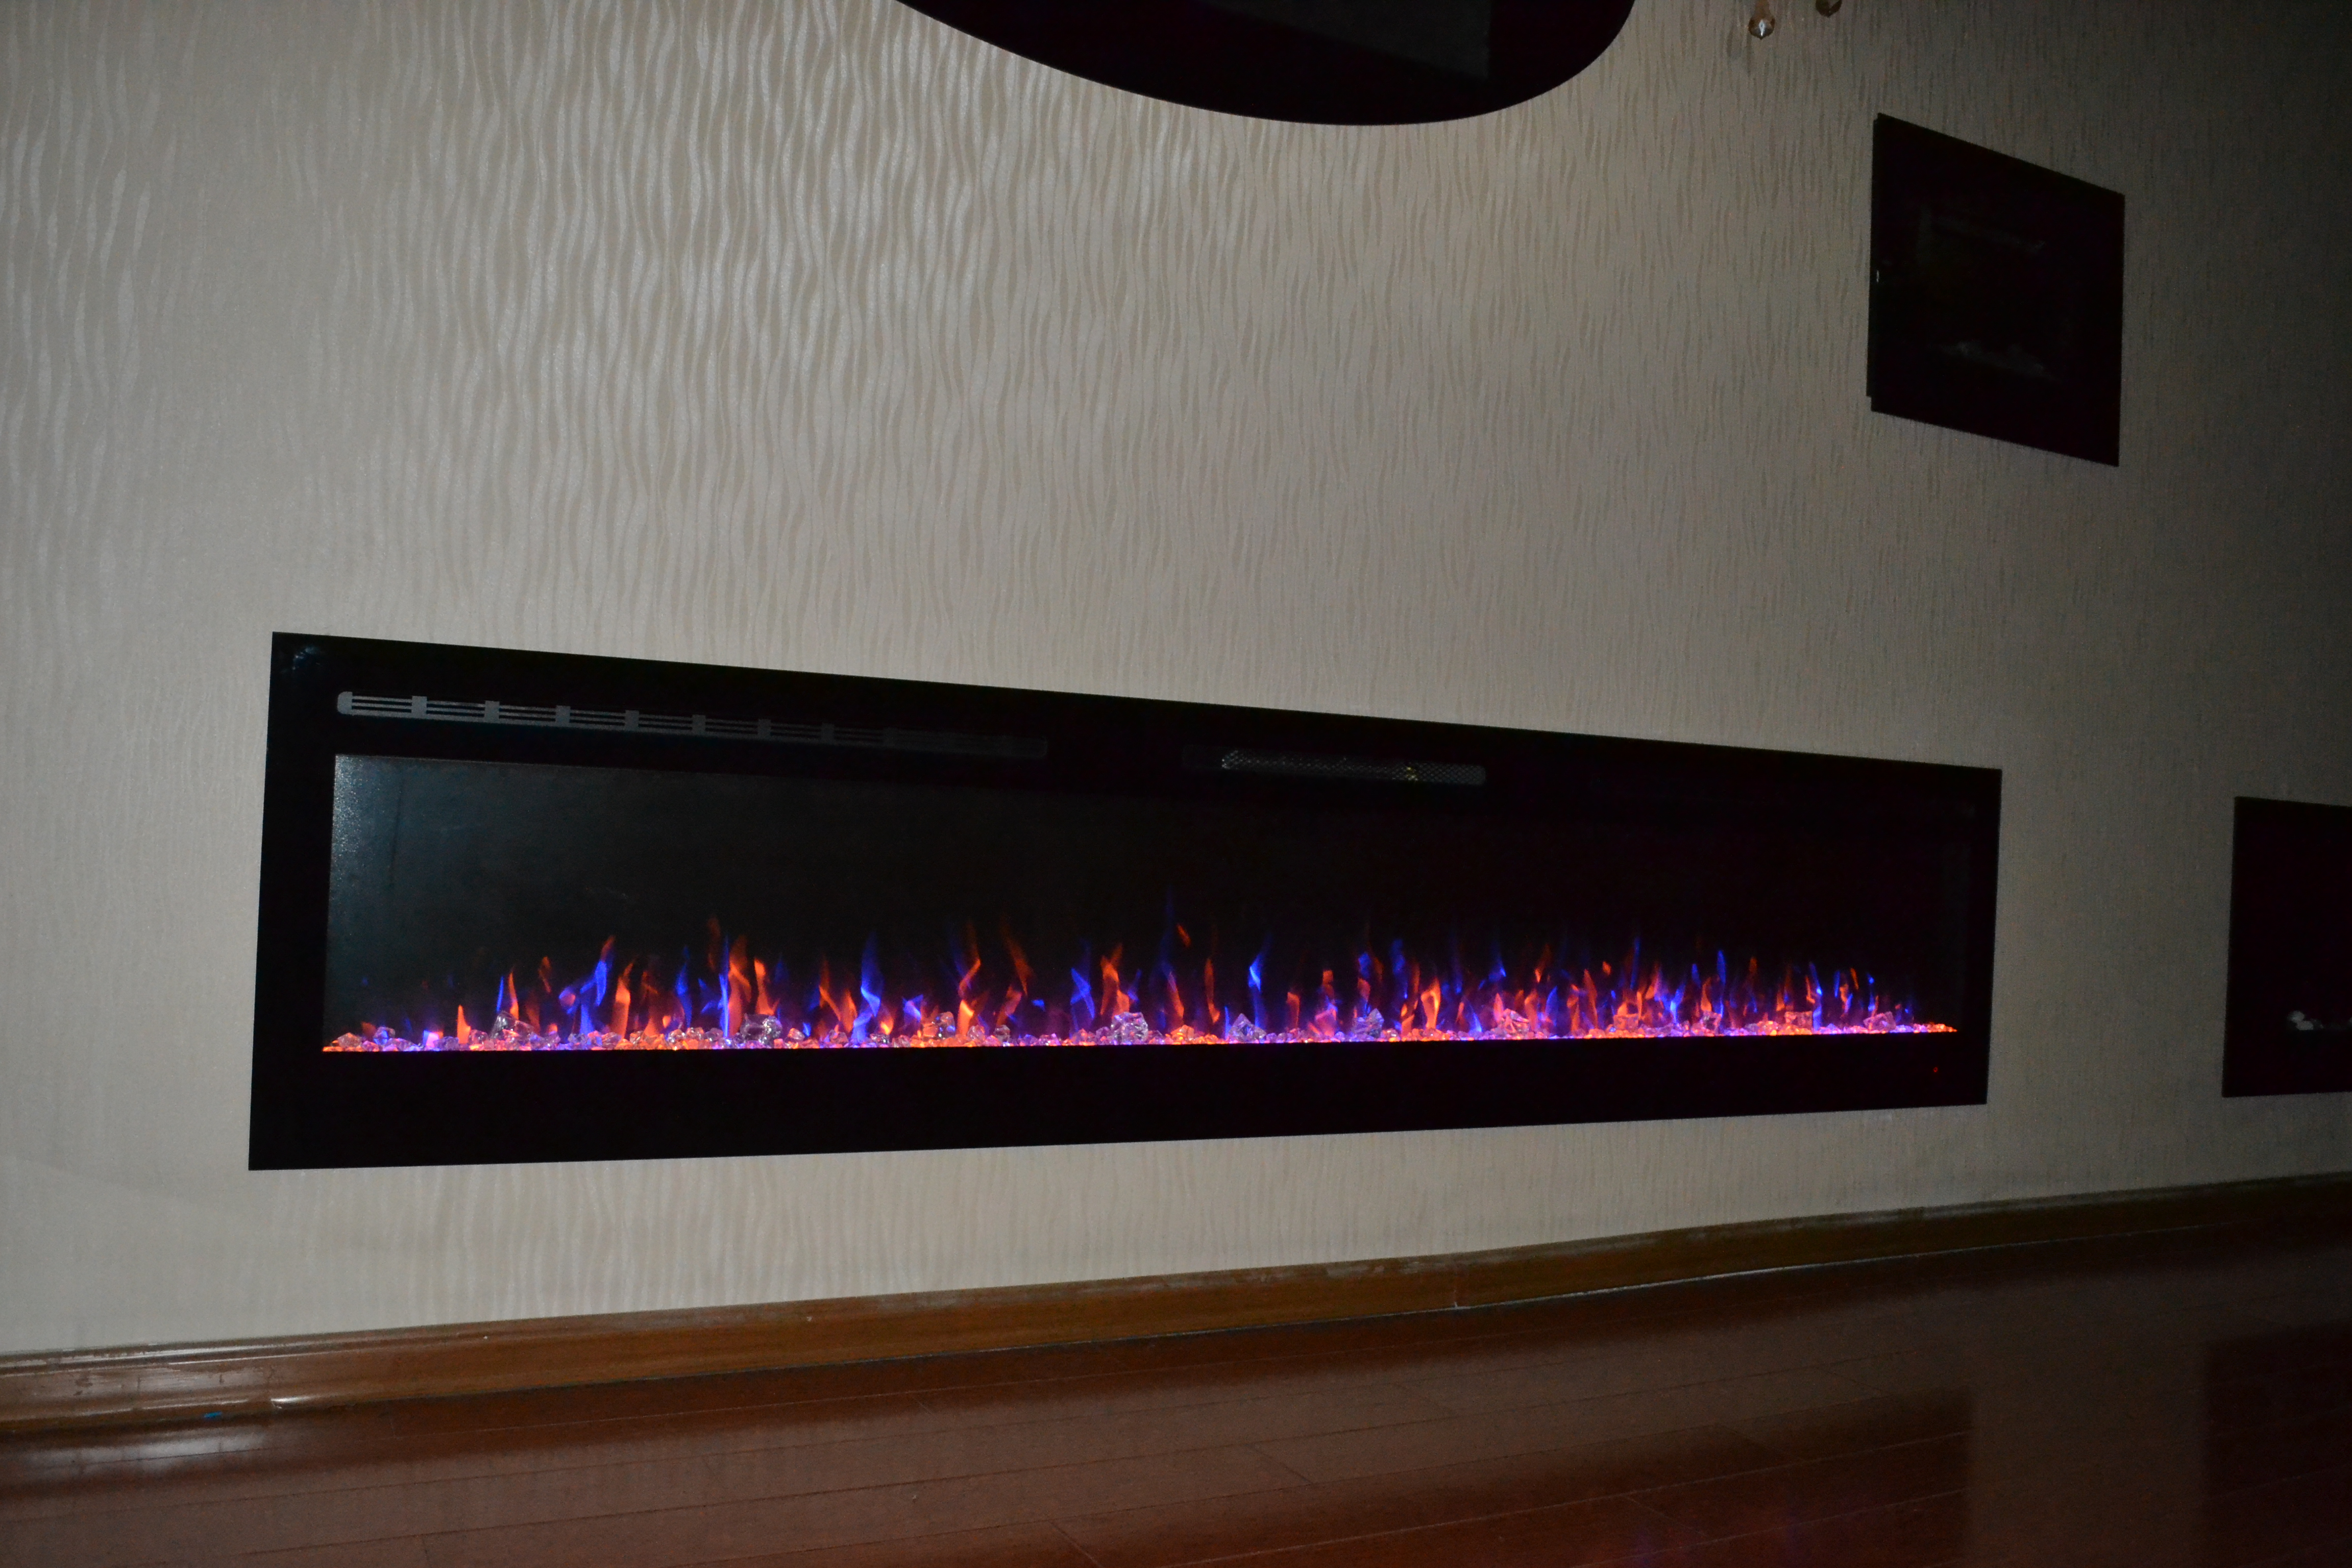 72inch Black Wall Mounted Electric Fire with 3 colour Flames and can be inset purple flames